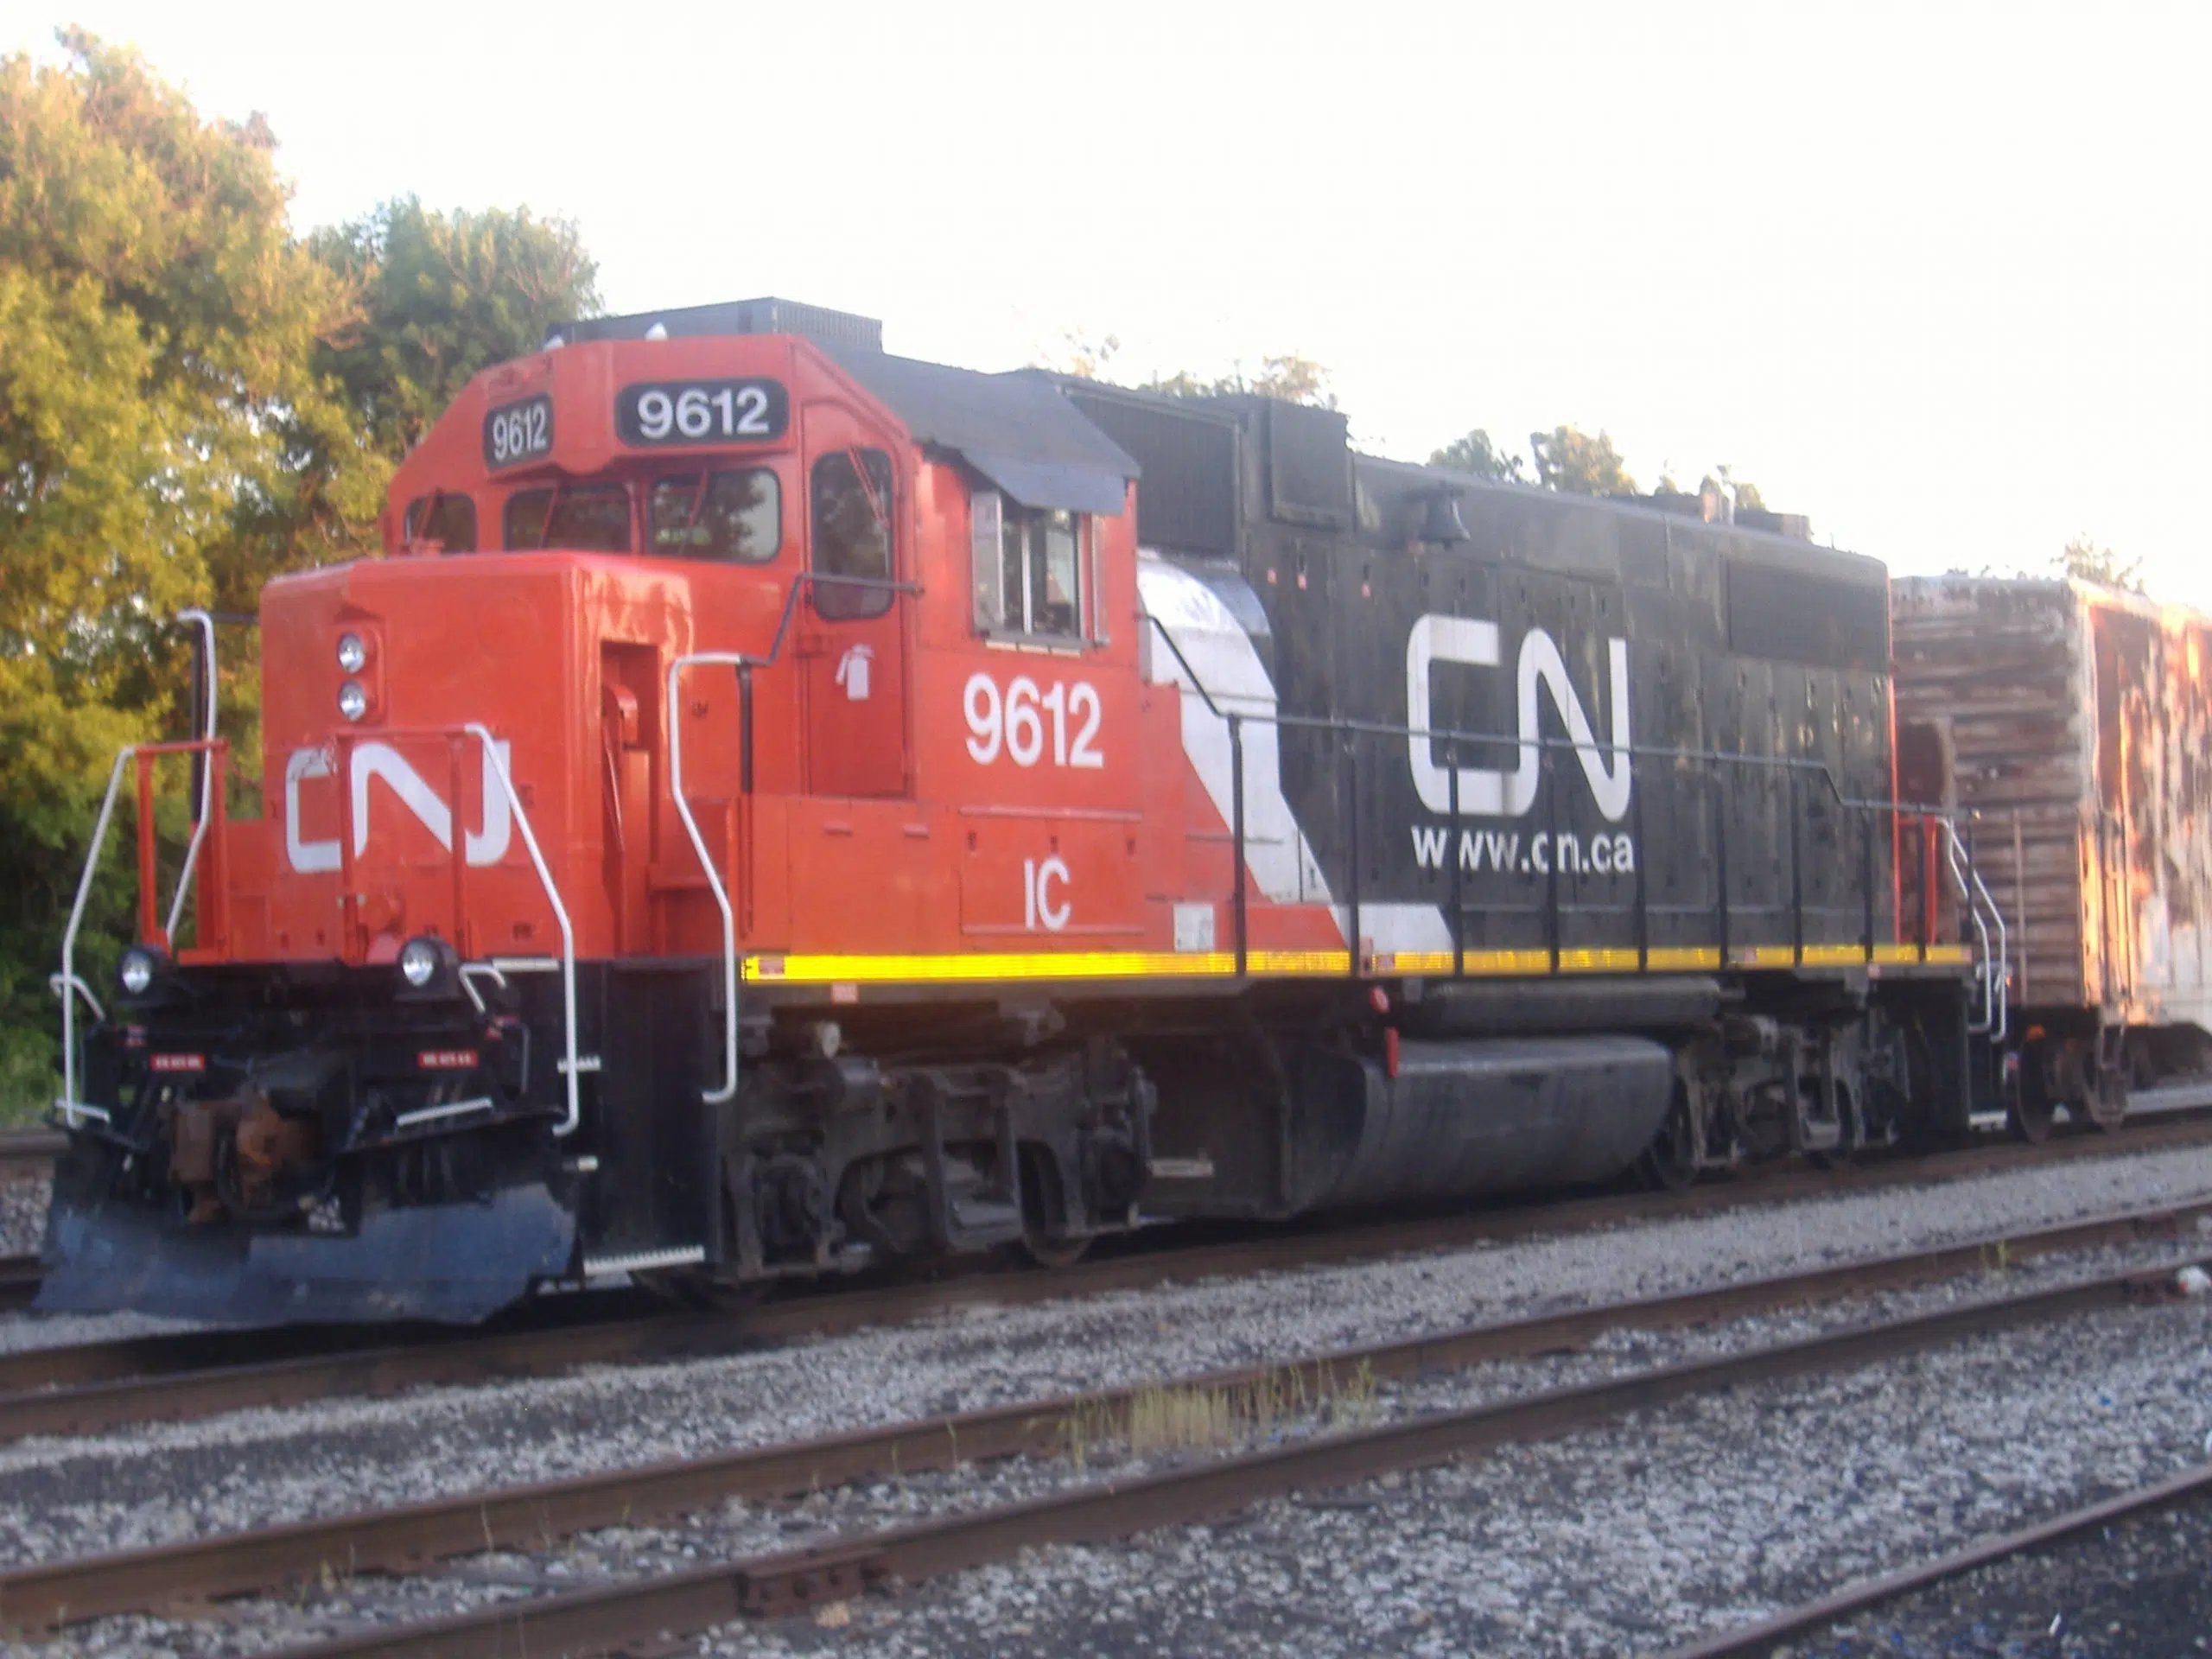 CN, CP trains out of service through Fraser Canyon due to mudslides